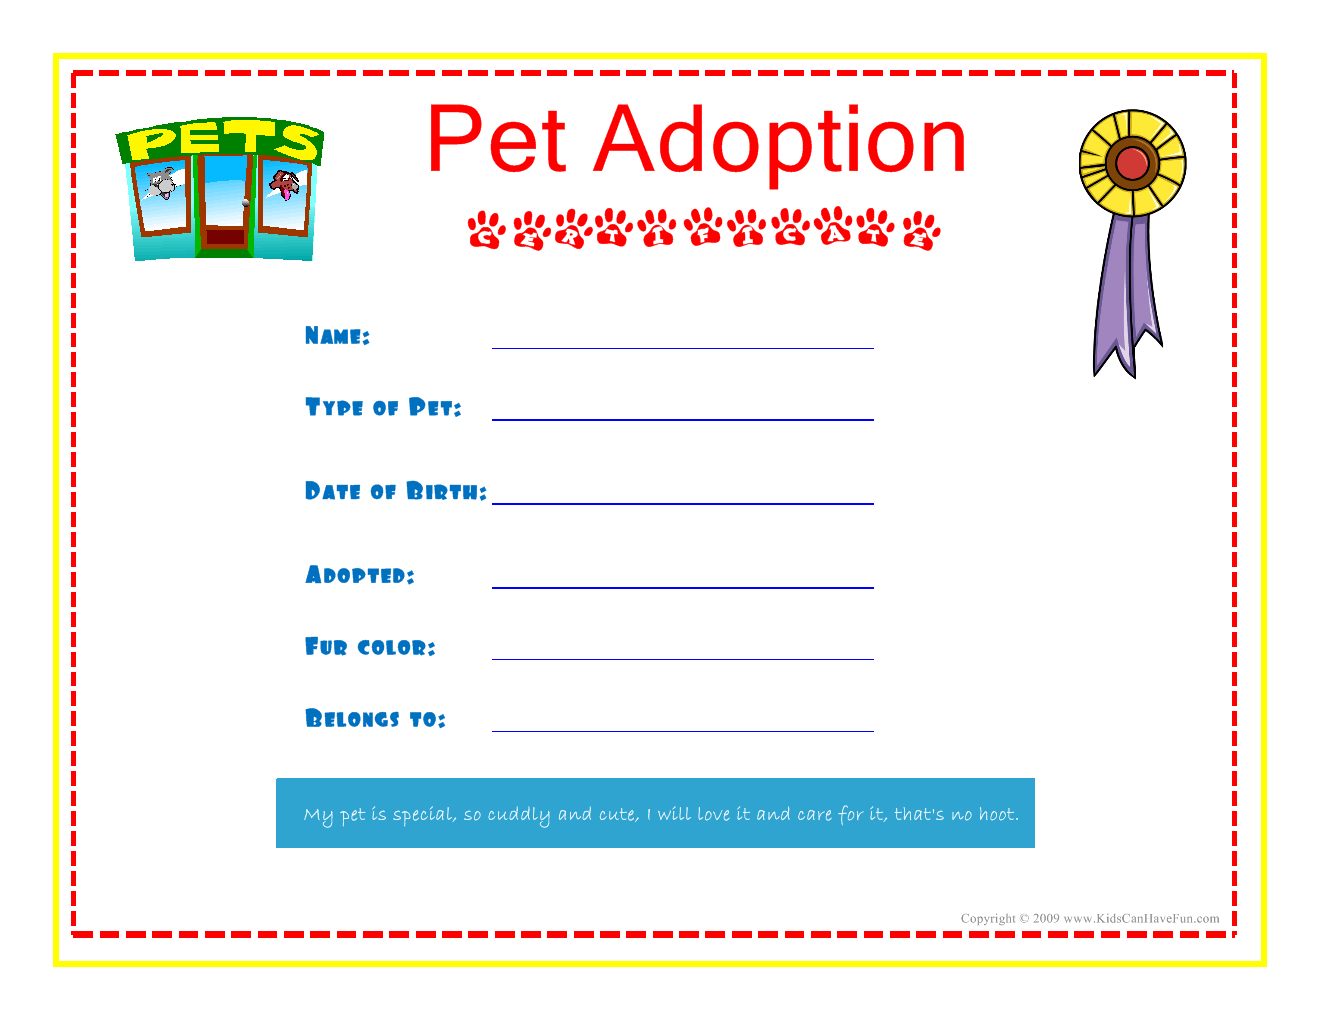 Pet Adoption Certificate For The Kids To Fill Out About Their Pet - Free Printable Stuffed Animal Adoption Certificate